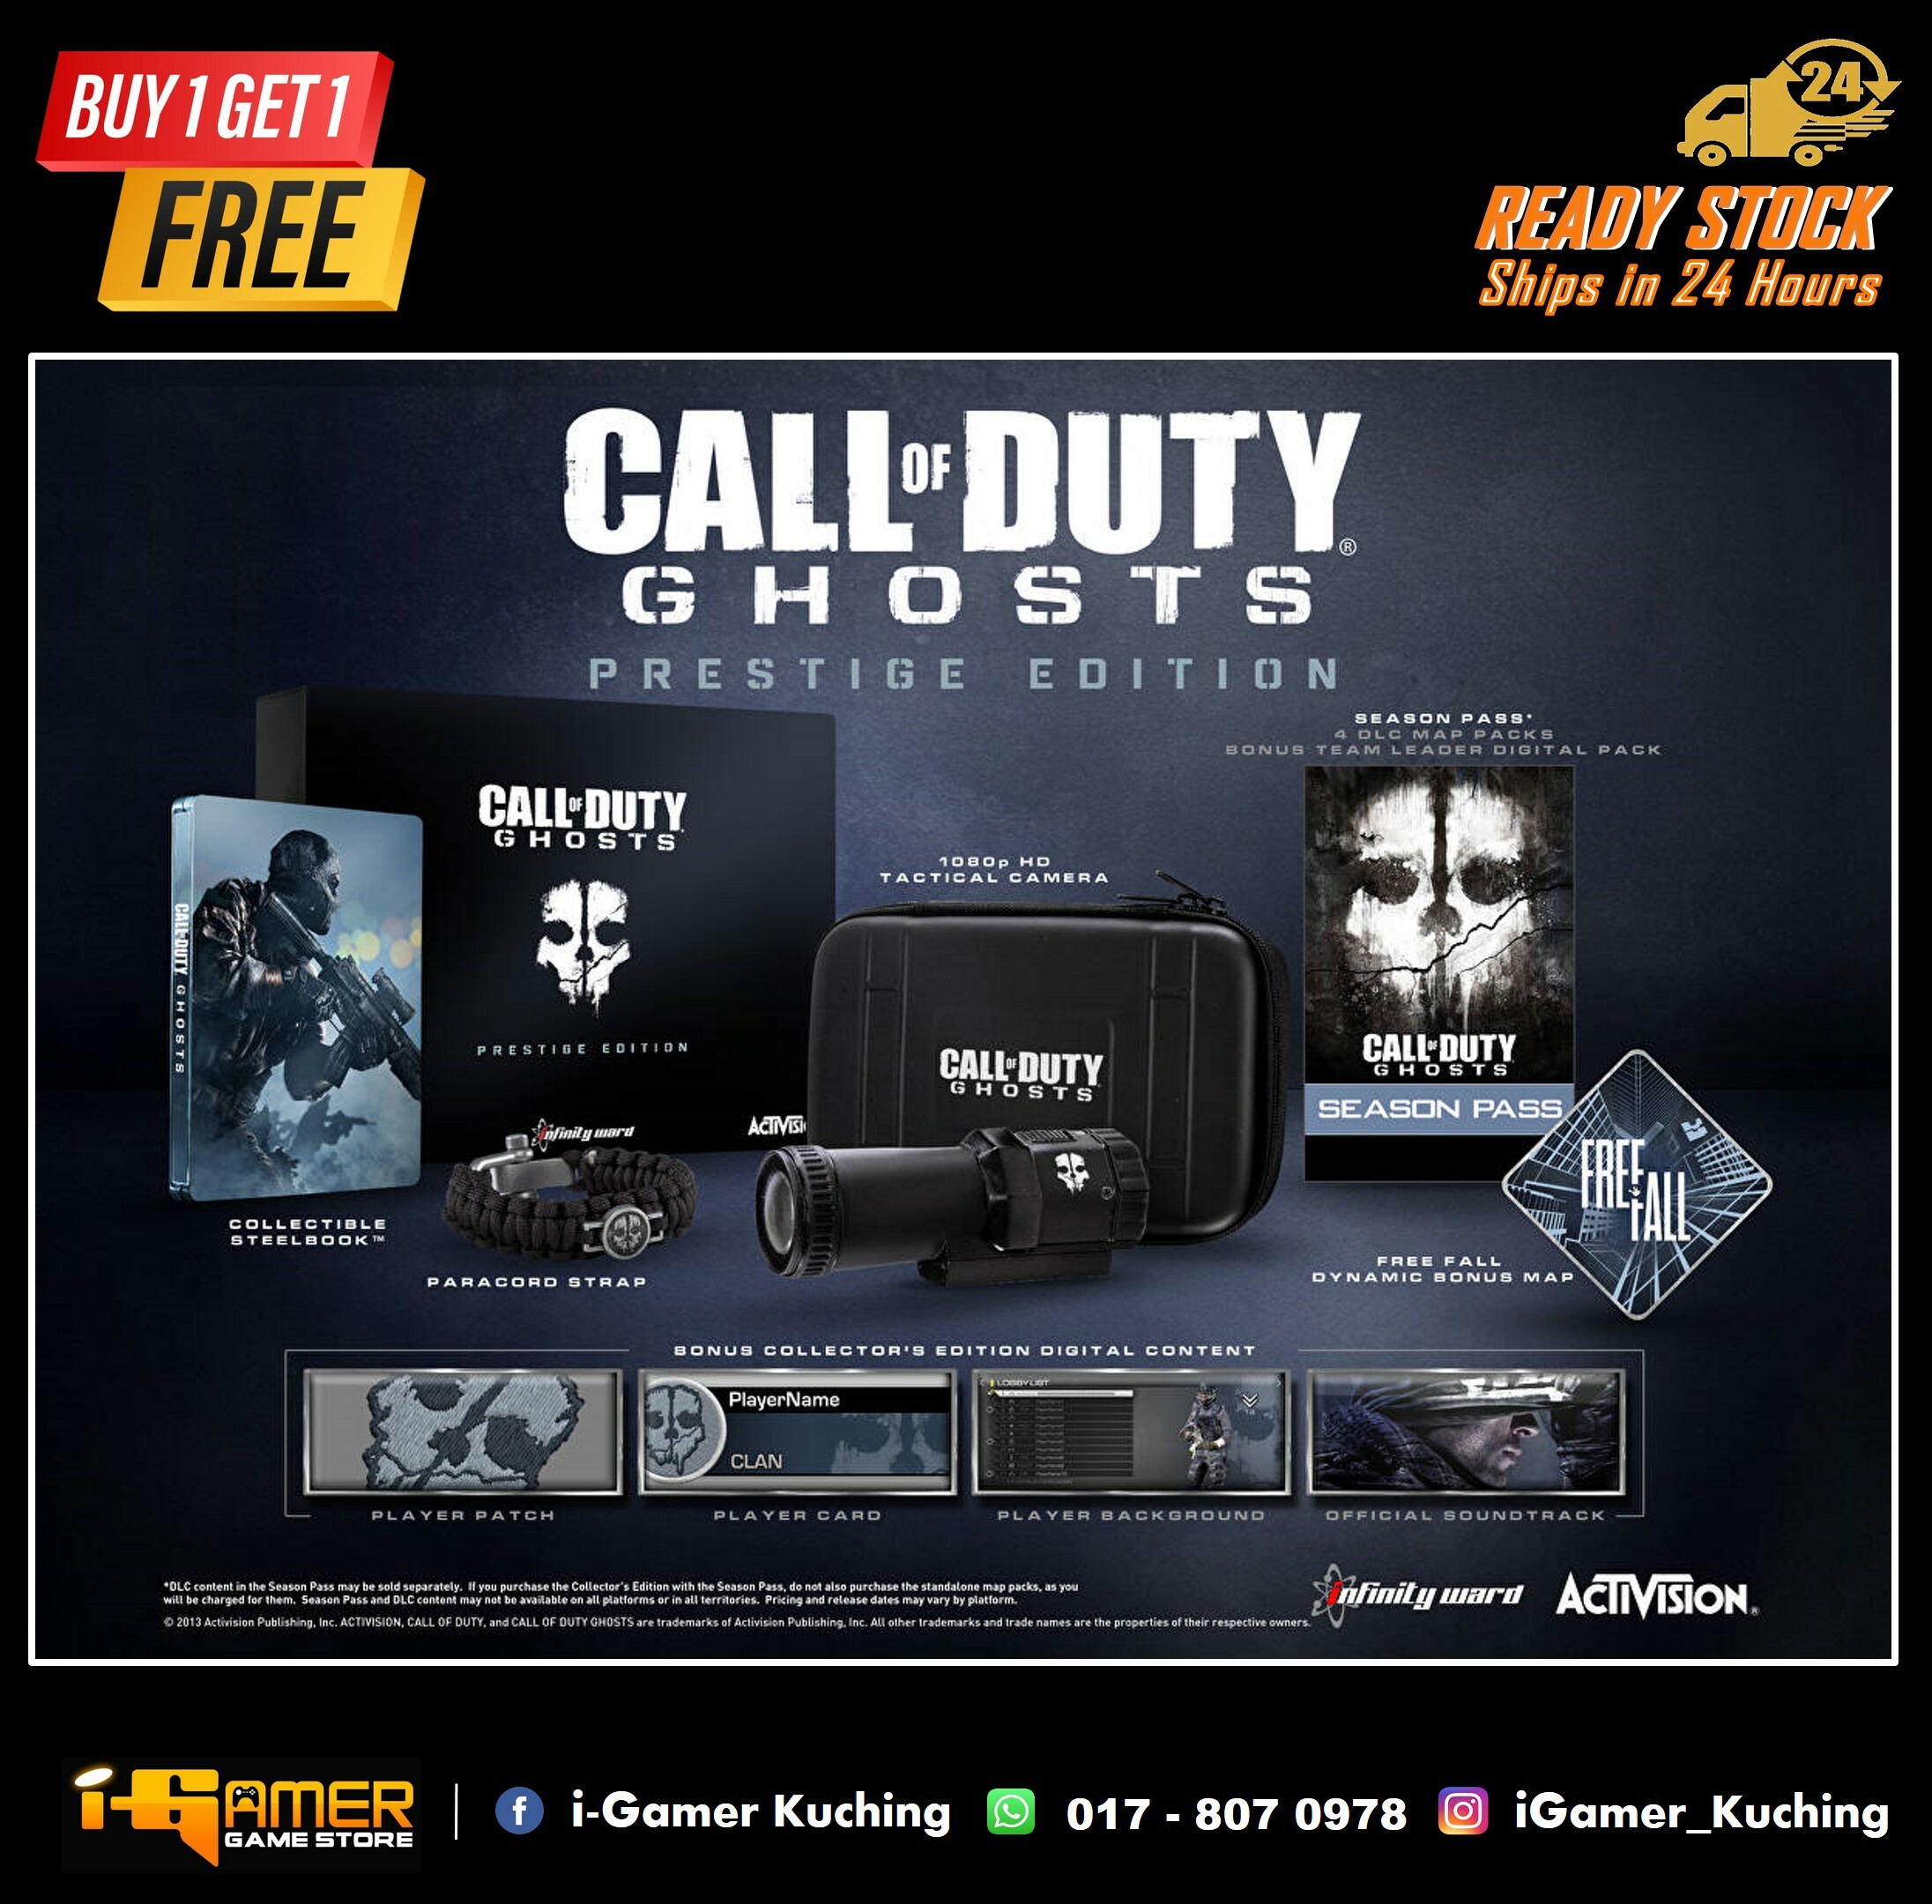 PS3 CALL OF DUTY GHOST PRESTIGE EDITION – i-Gamer Game Store